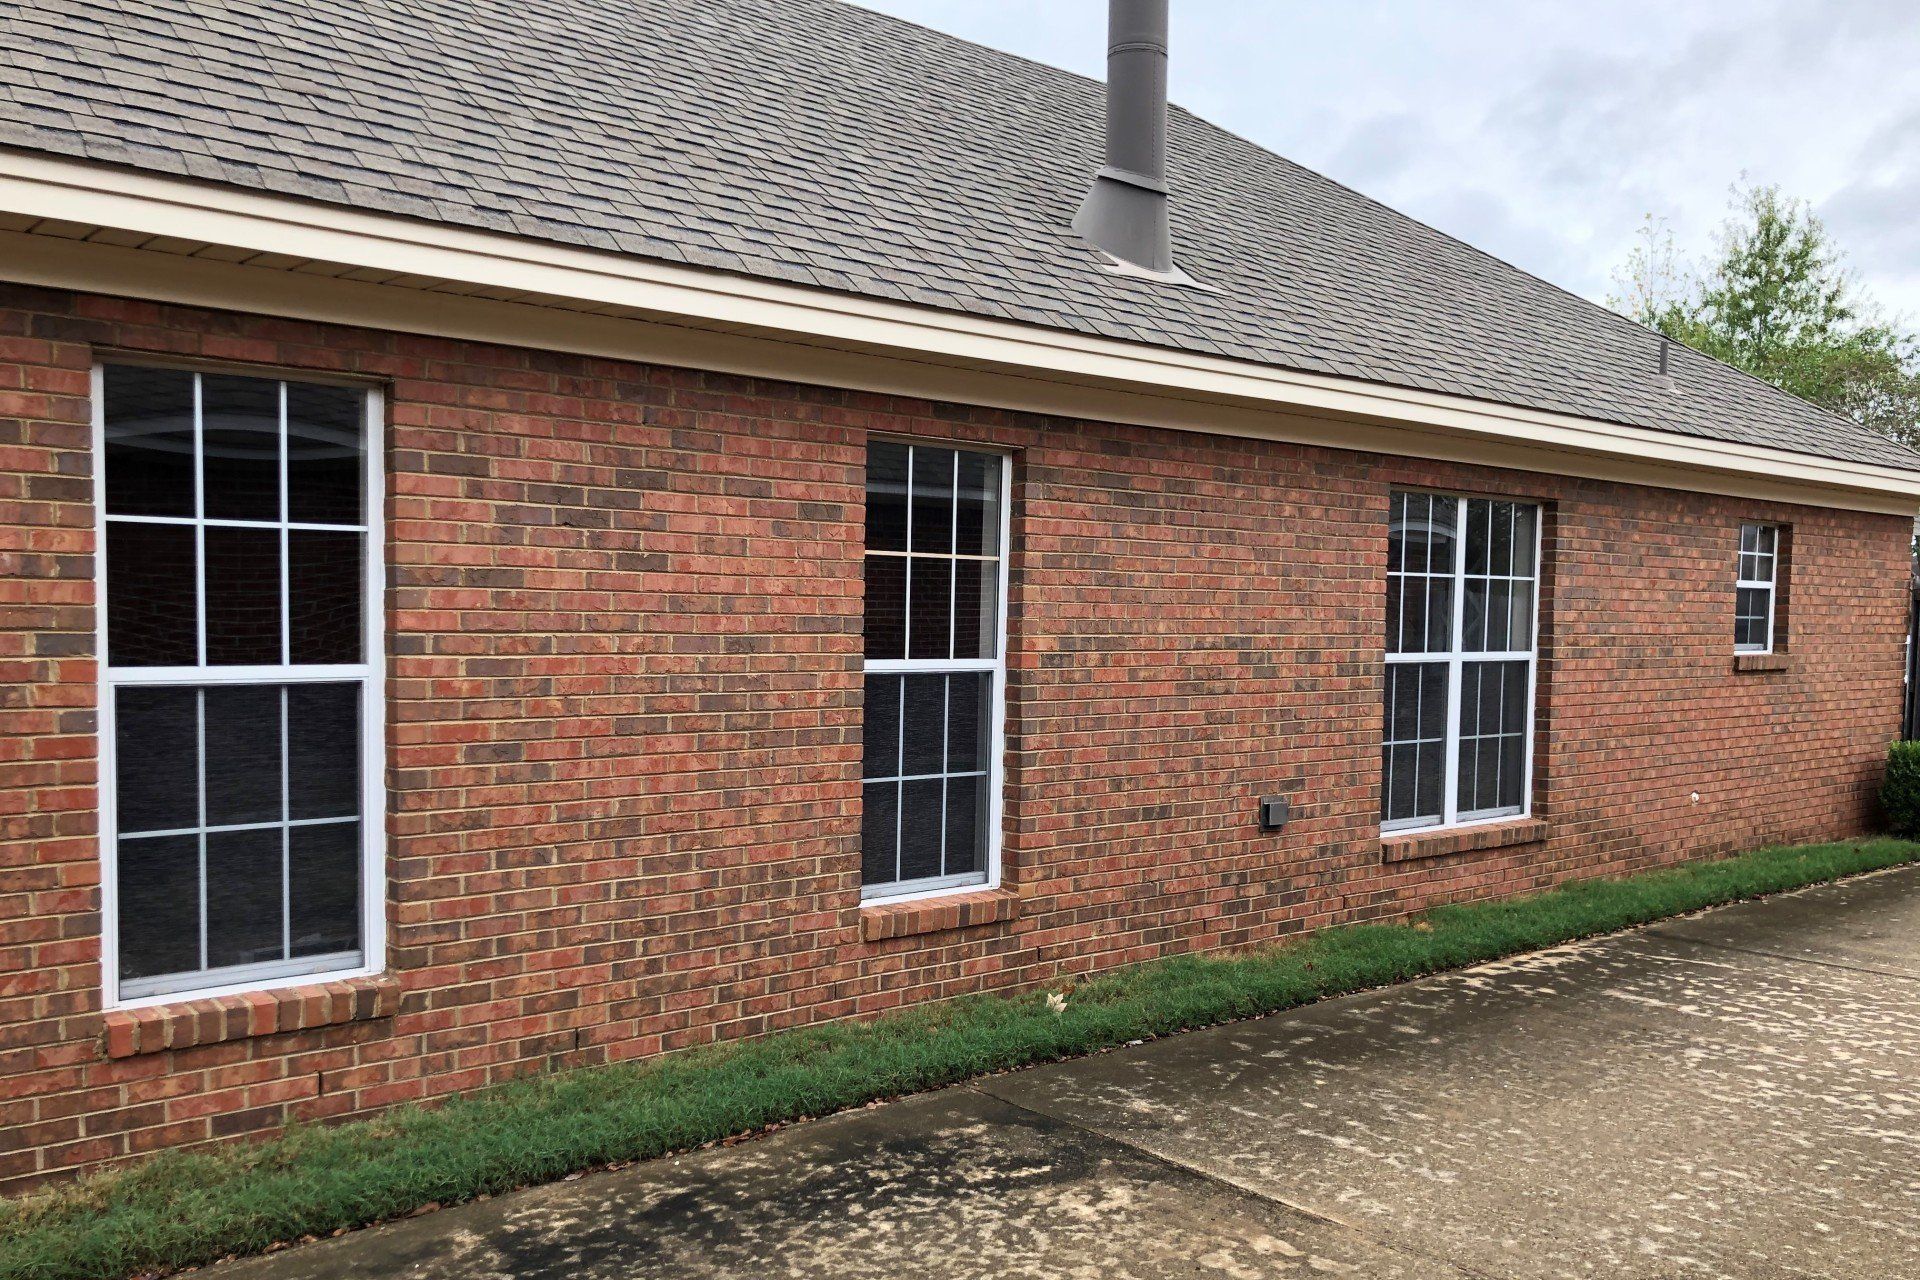 Authentic SPF Tint installation to home windows in Montgomery on 10.16.2019 - Pro window tinting Montgomery, AL